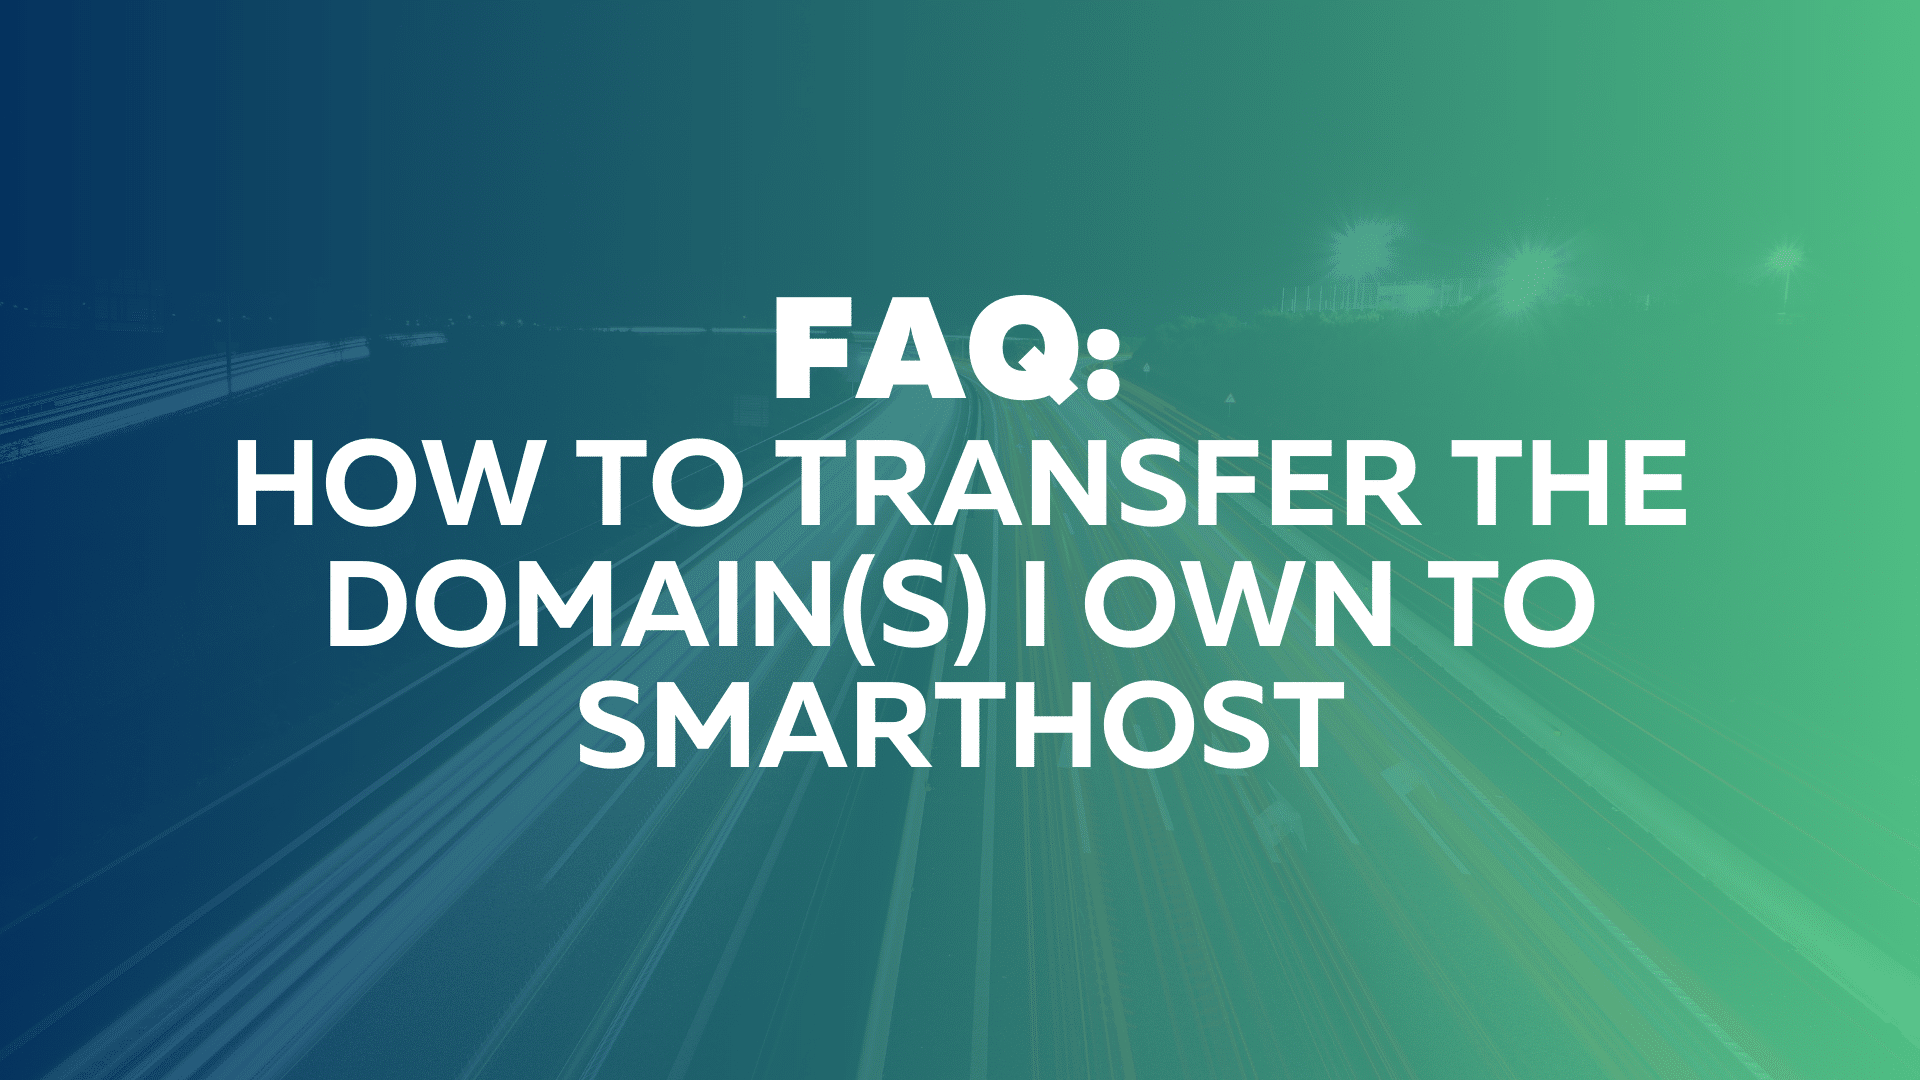 The image shows instructions on how to transfer domain(s) owned by the user to Smarthost.